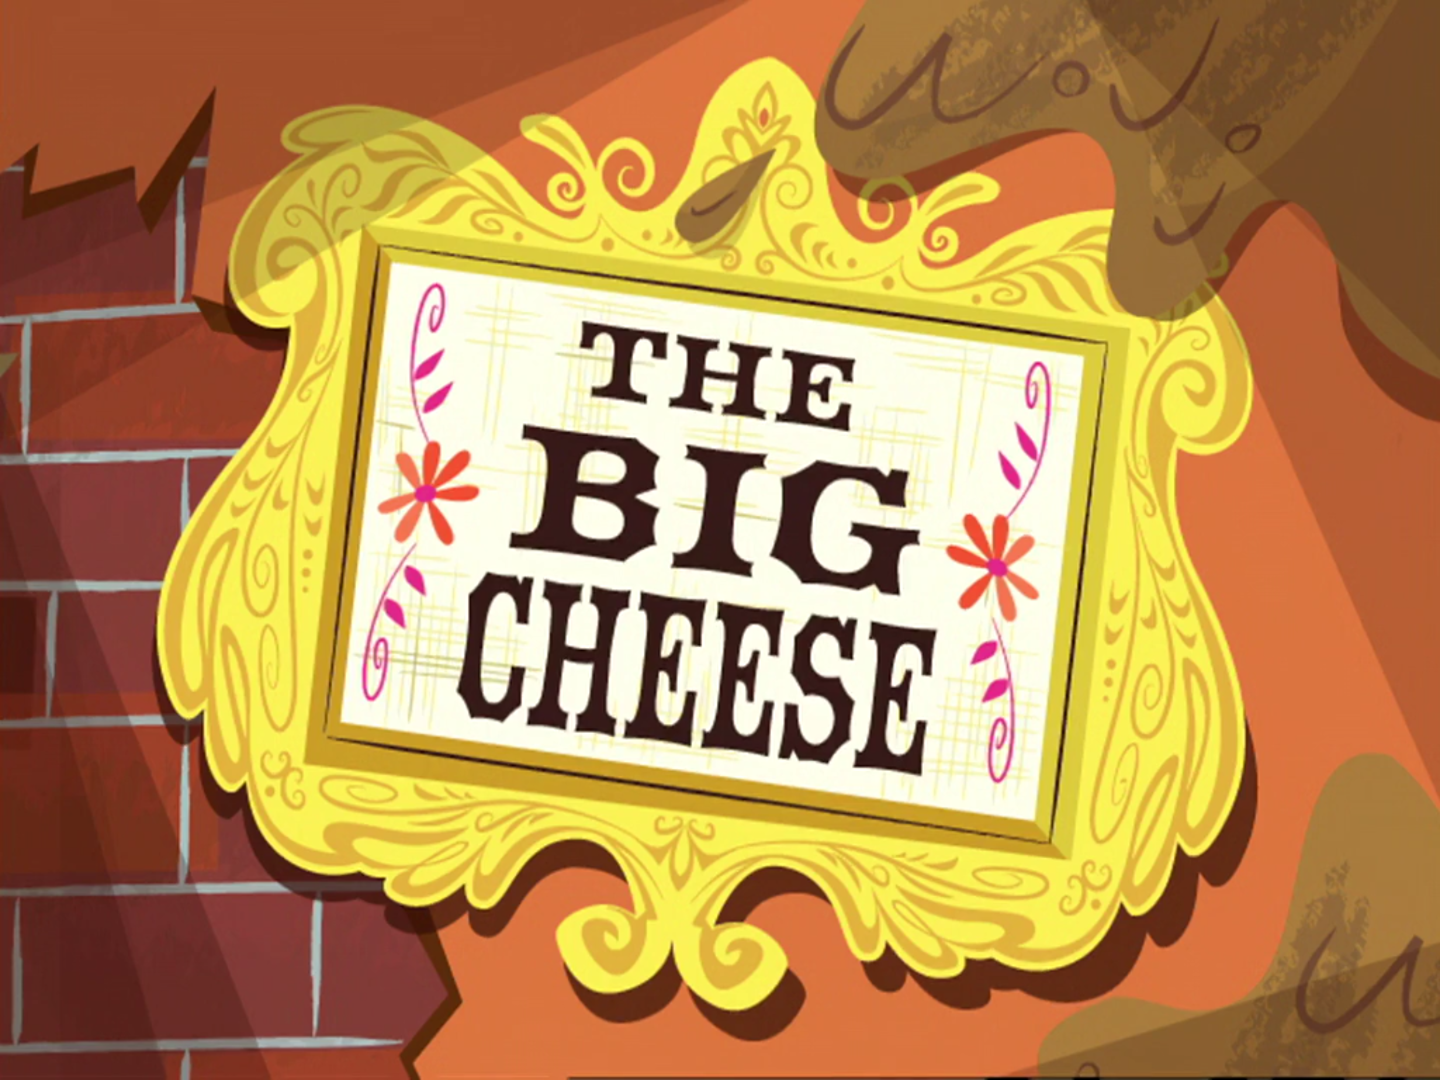 Everything s perfect. Биг чизи. Foster's Home for Imaginary friends the big Cheese. Big Cheese. Часв 1928 Disney the big Cheese mc0376.